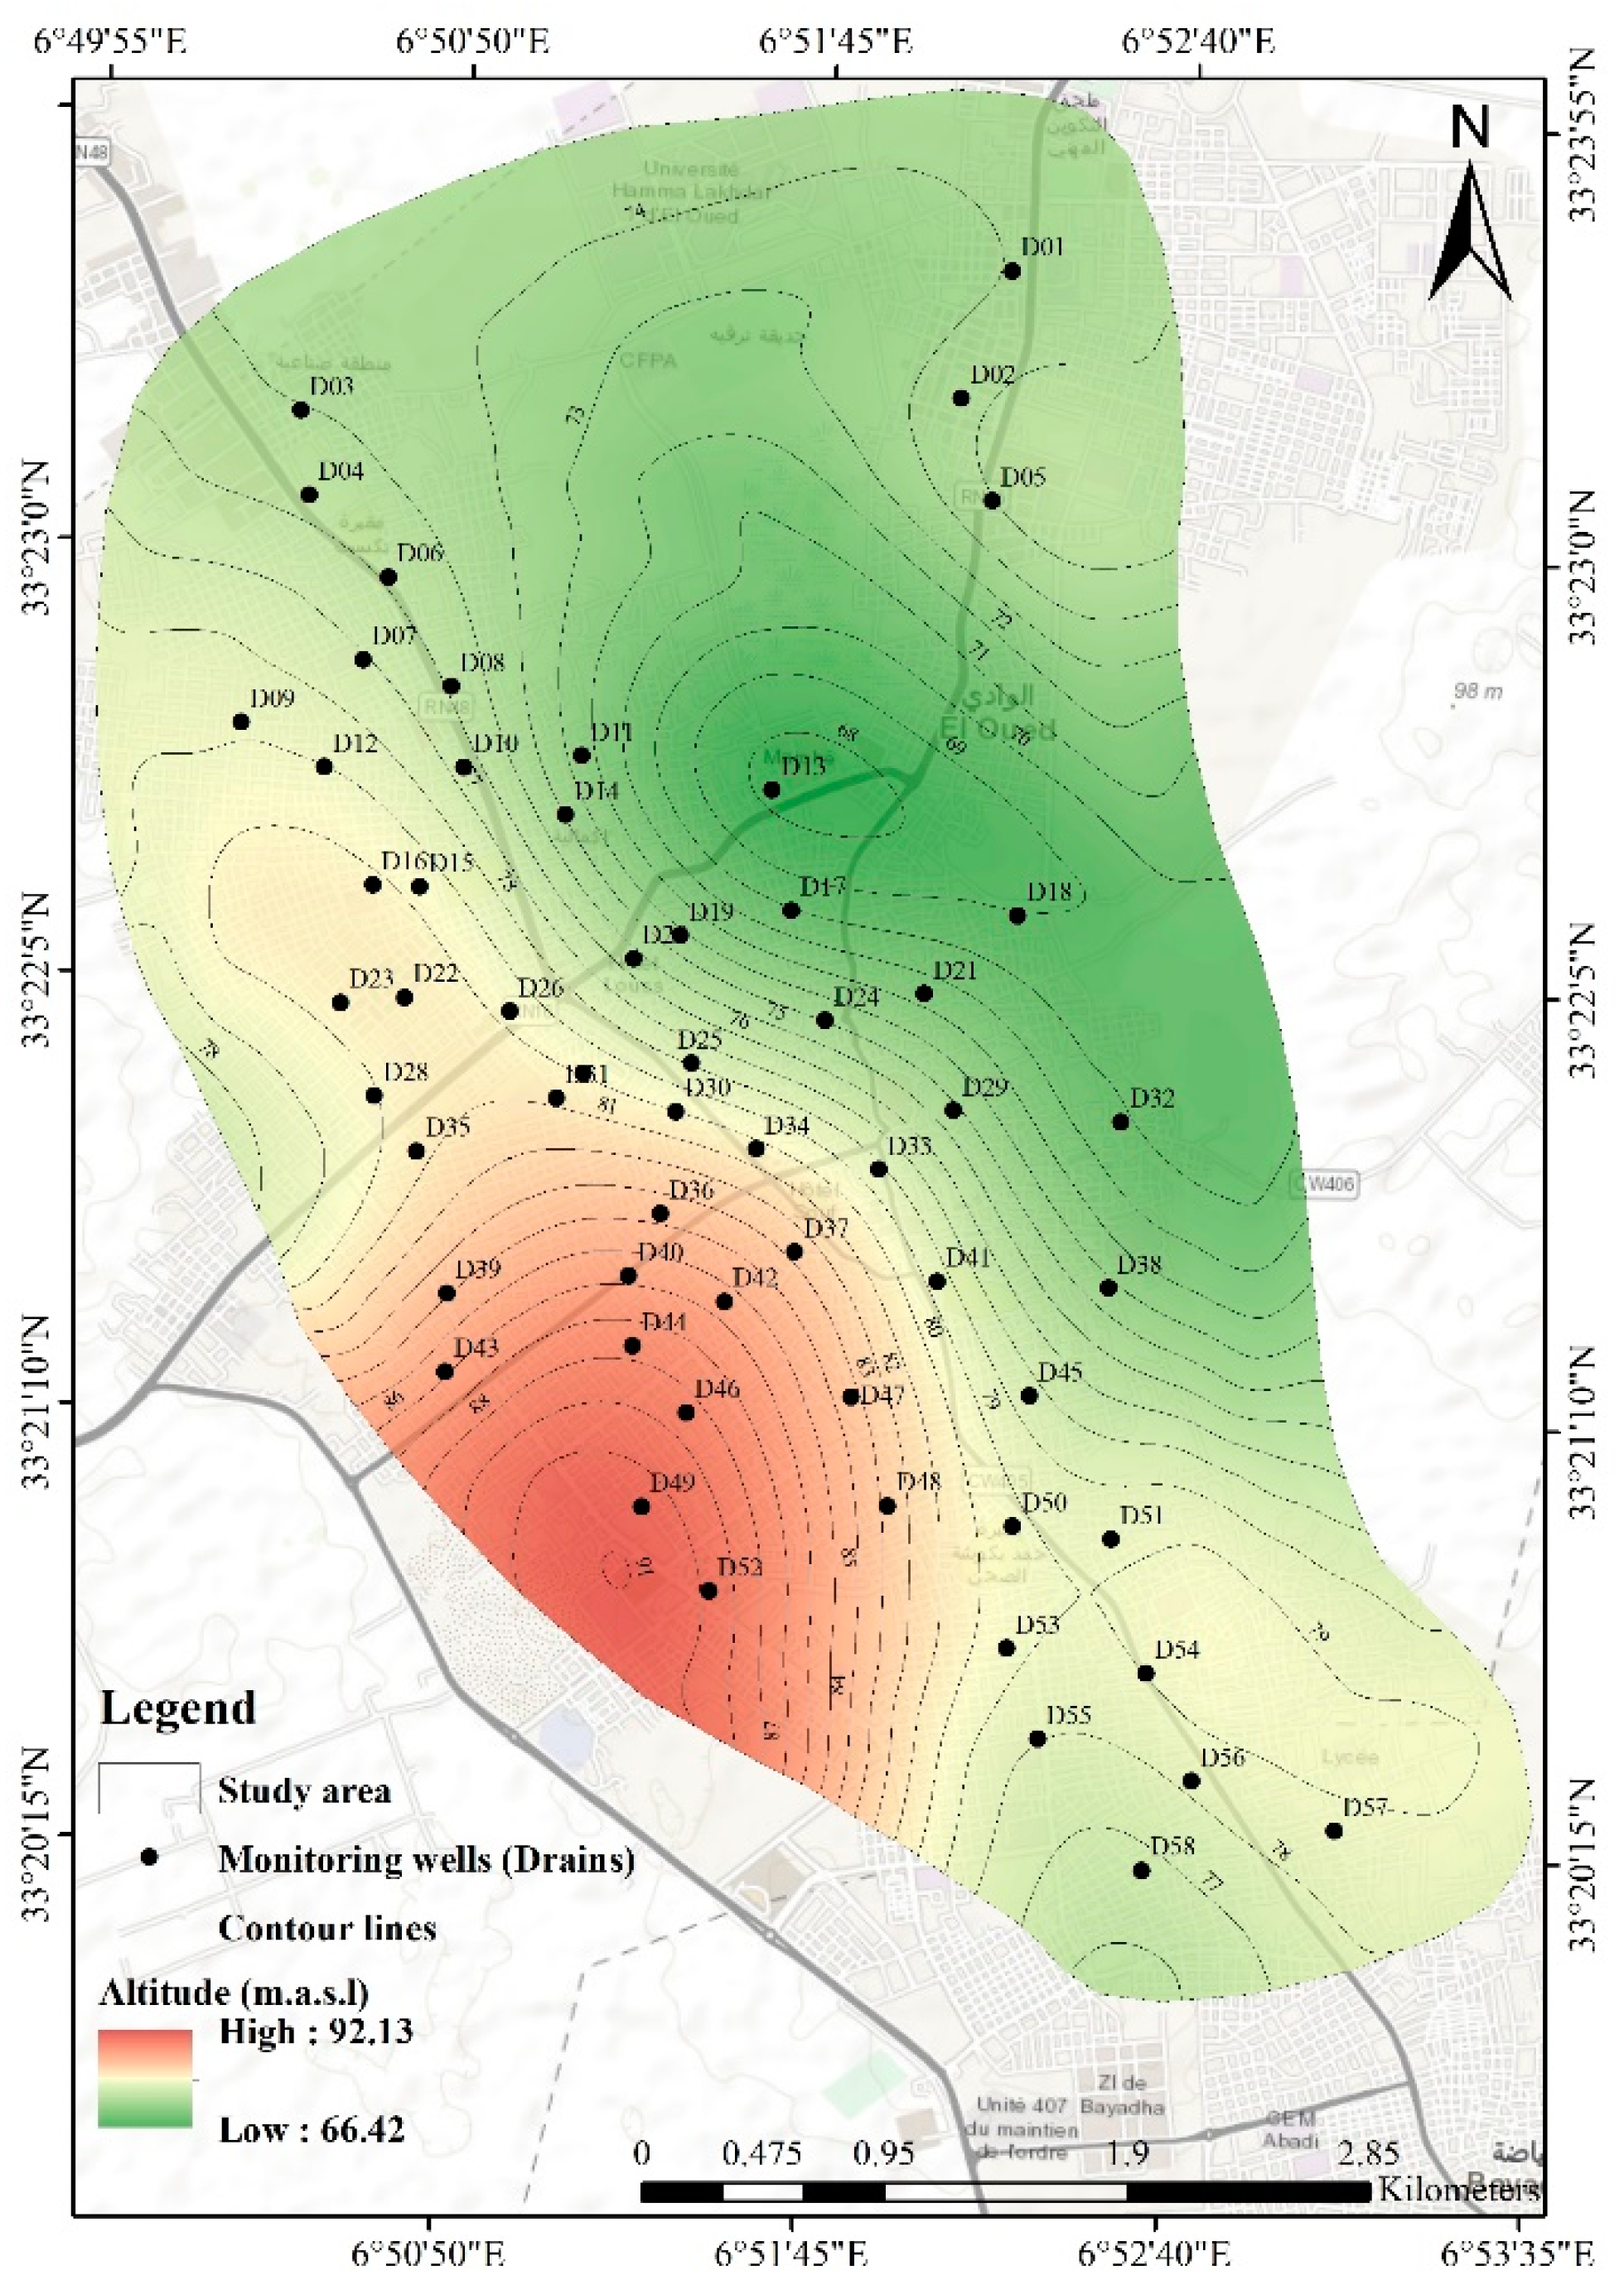 Water | Free Full-Text | Assessment of Spatial Distribution and Temporal  Variations of the Phreatic Groundwater Level Using Geostatistical  Modelling: The Case of Oued Souf Valley&mdash;Southern East of Algeria |  HTML